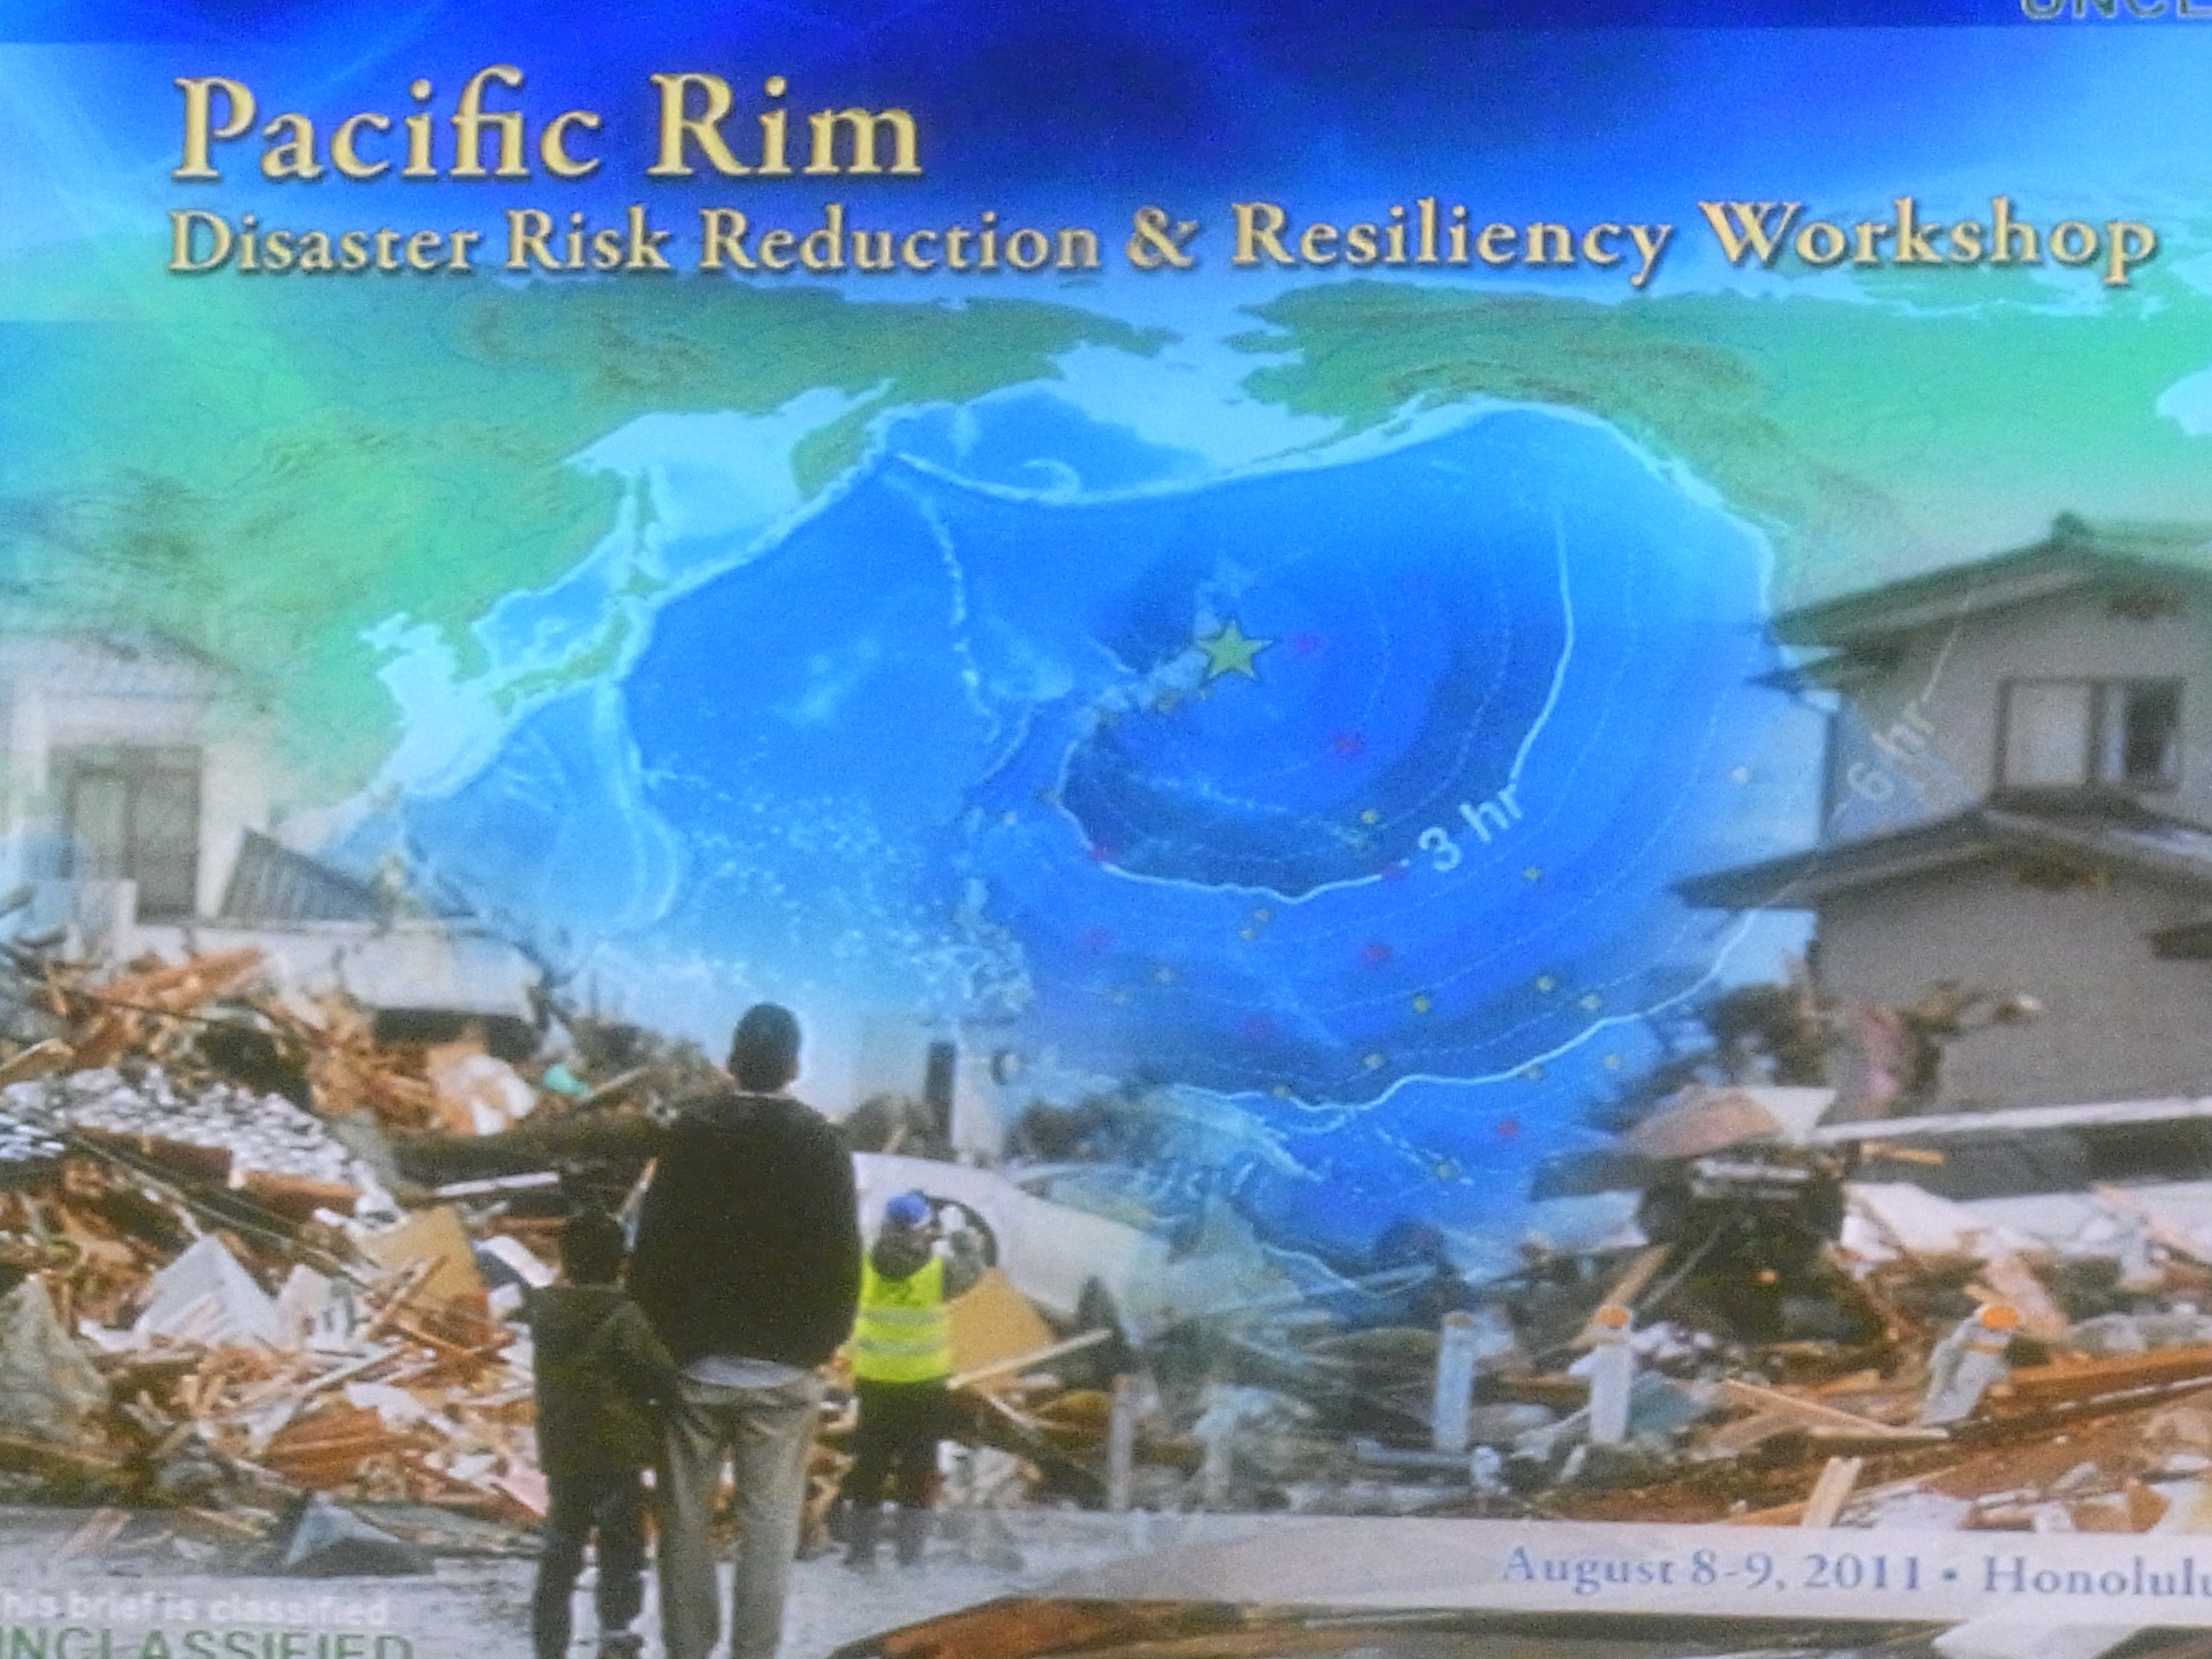 Pacific Rim Disaster Risk Reduction & Resiliency Workshop 参加報告